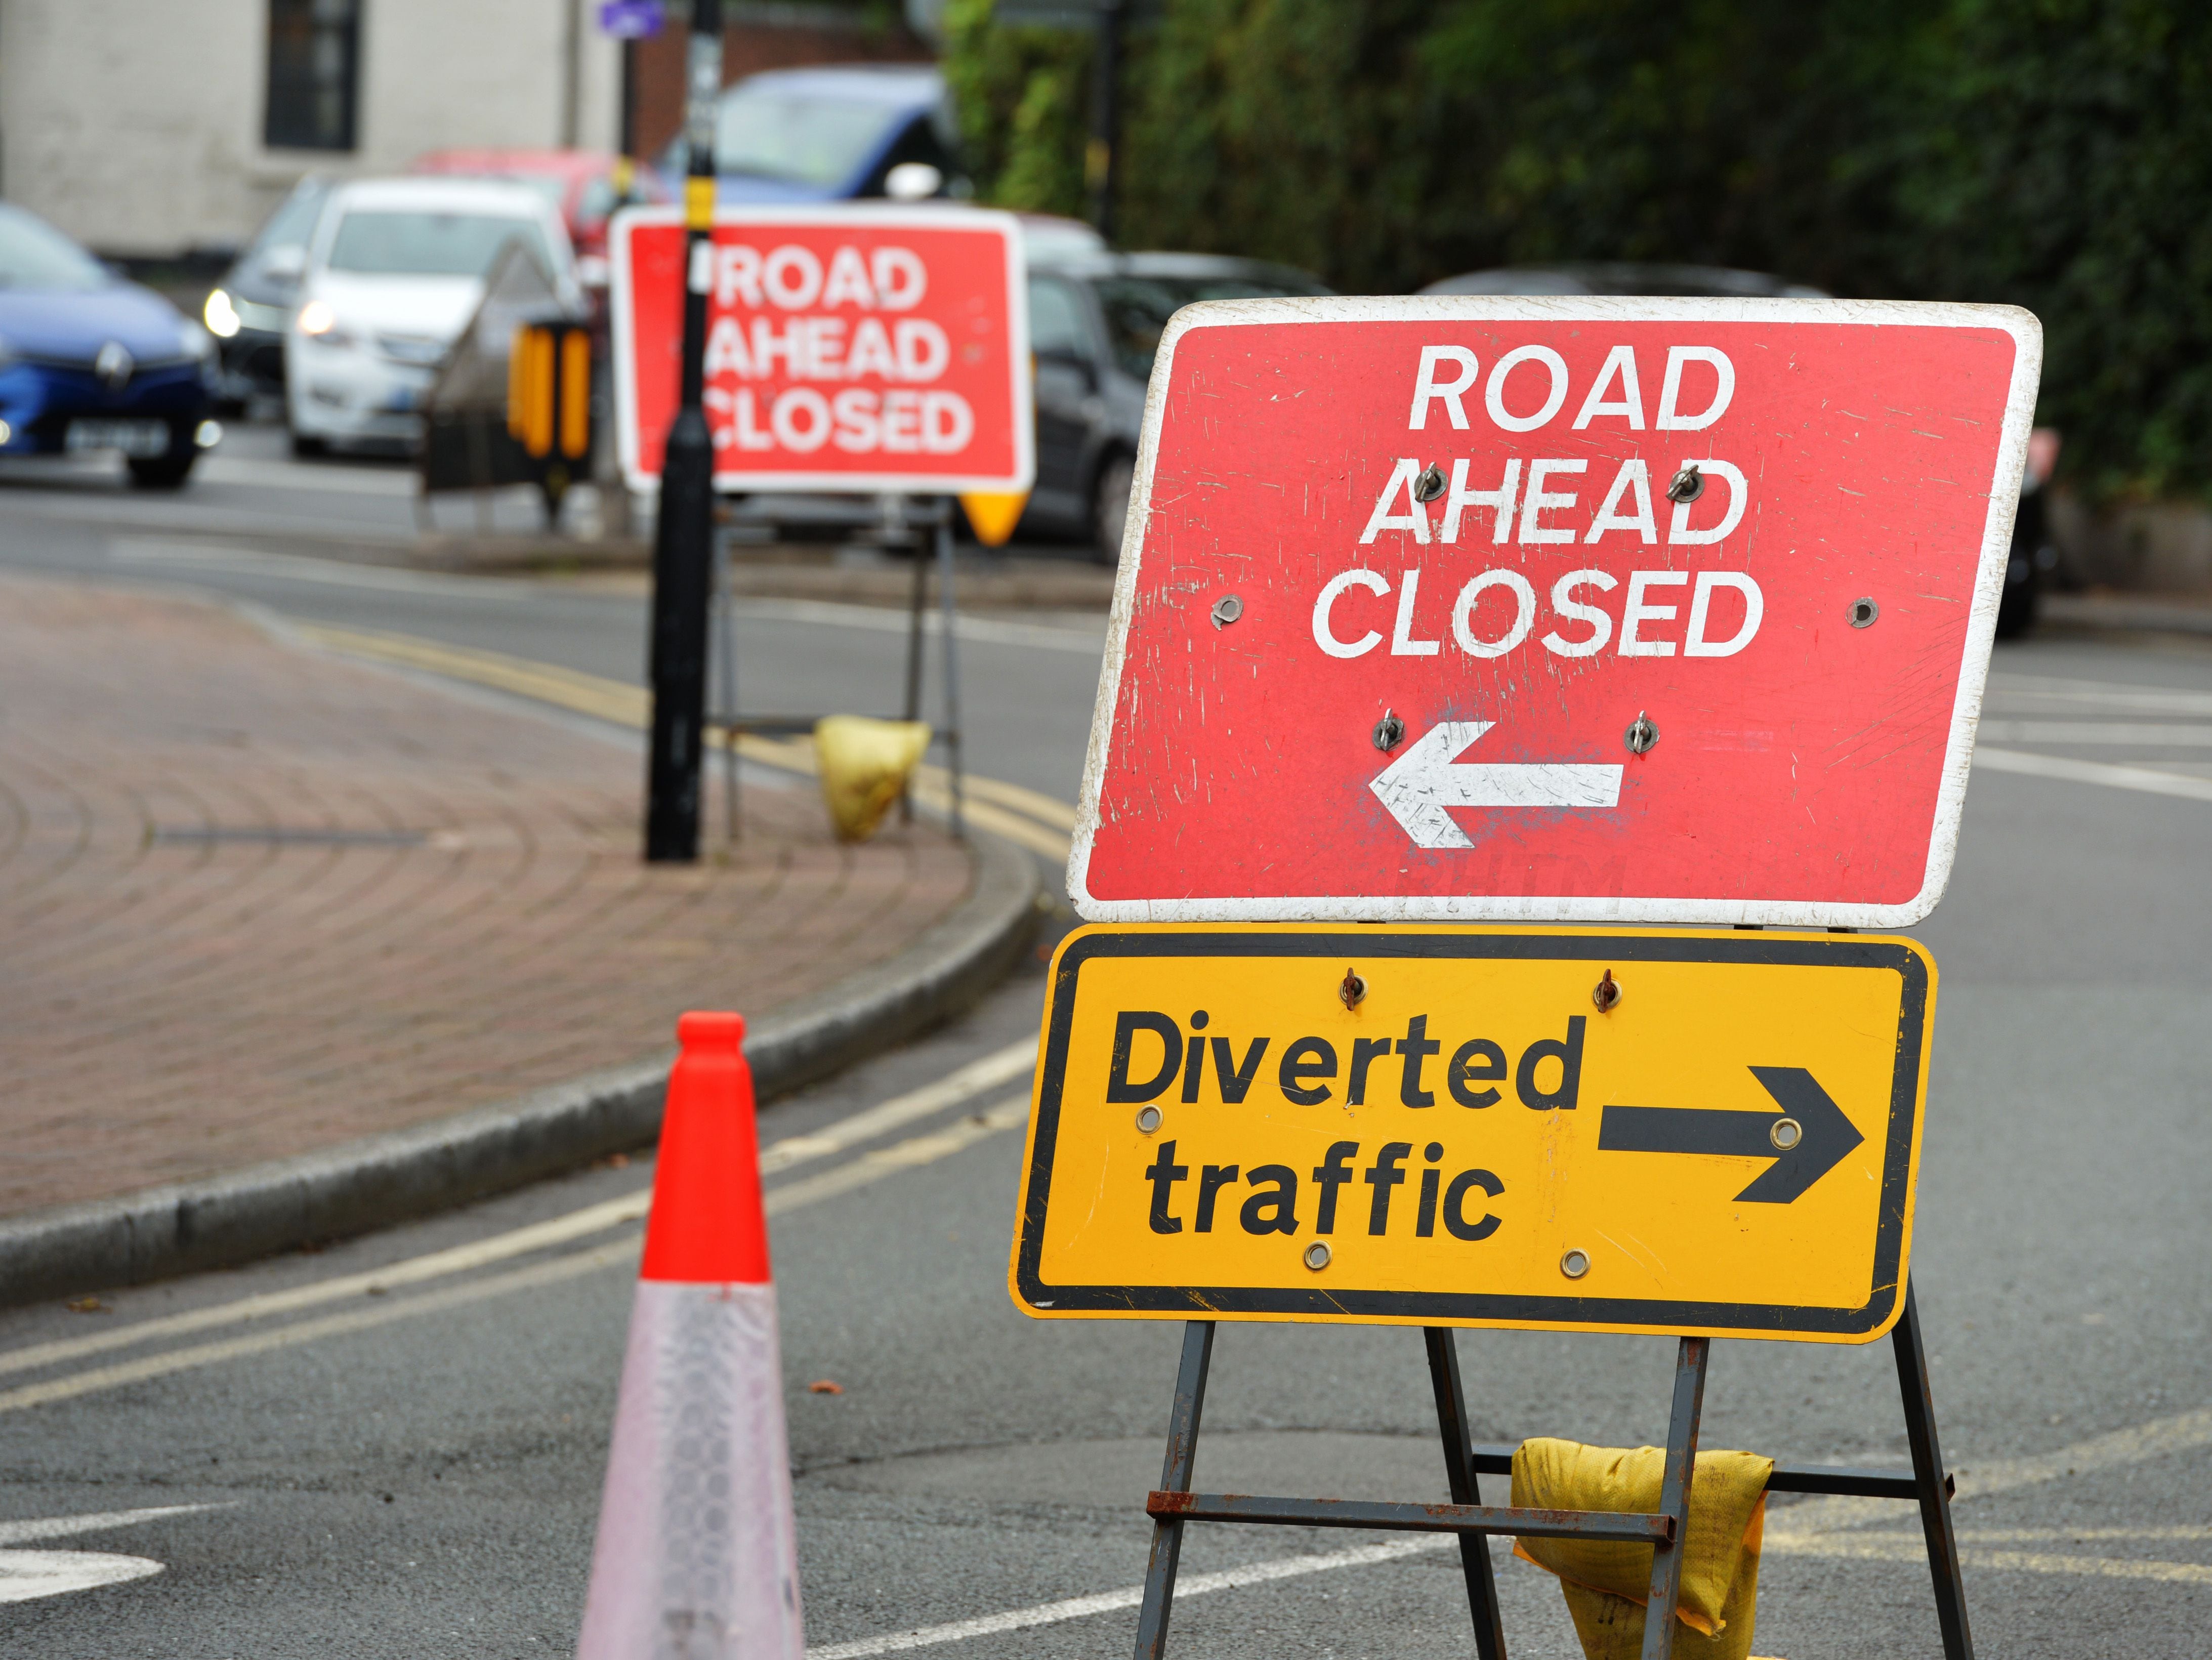 Sandwell road to shut for 'remedial water works'